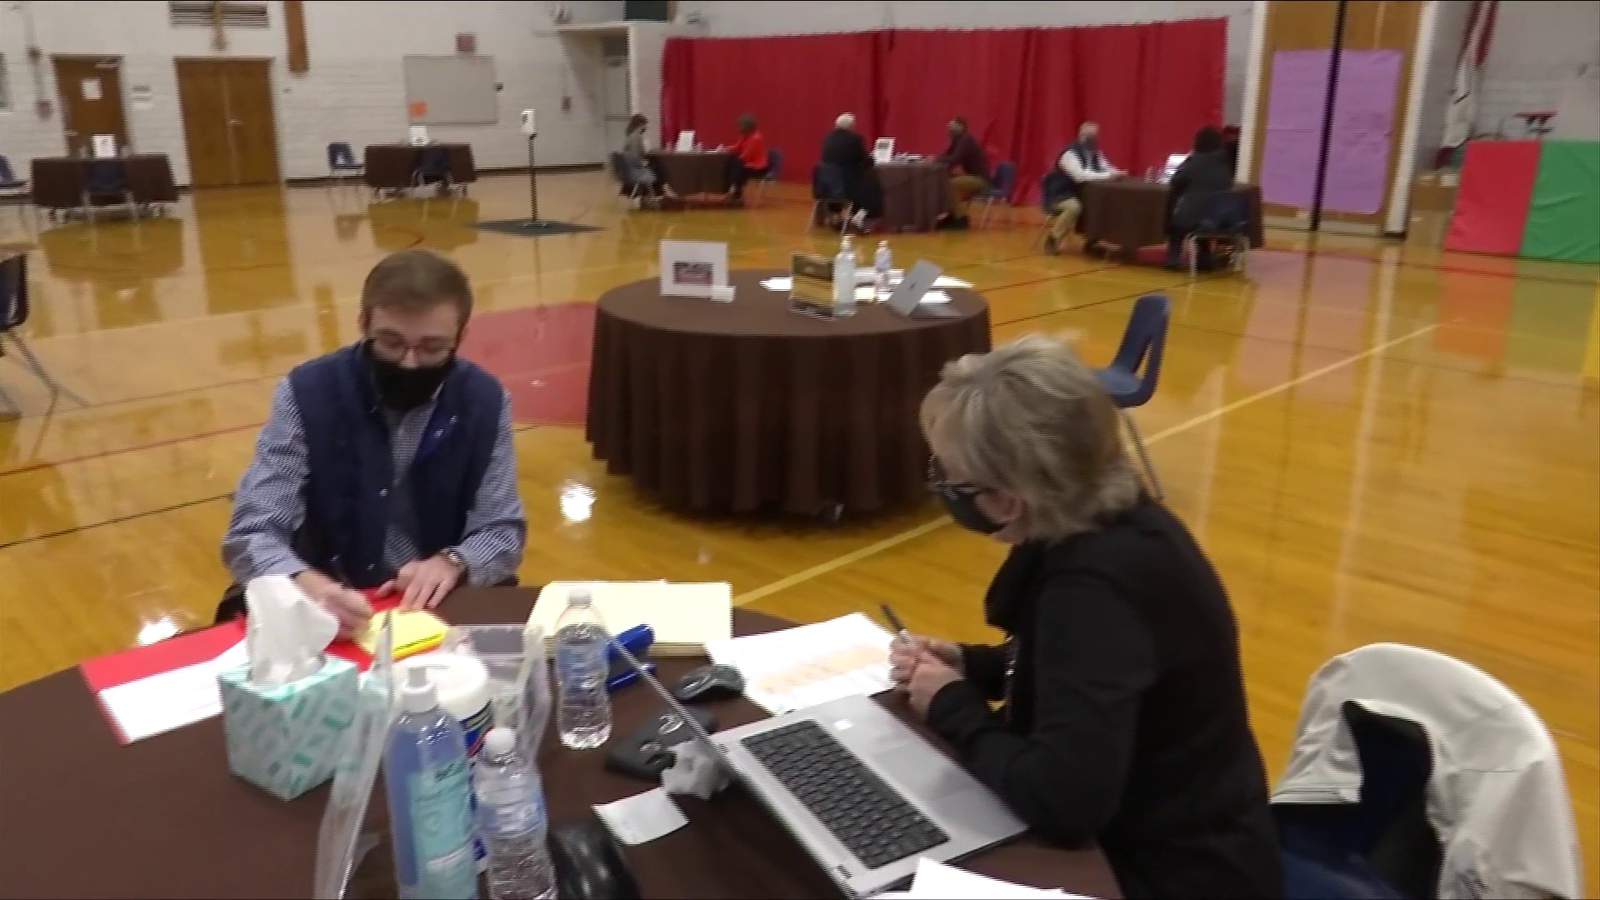 Botetourt County Public Schools hosts job fair to fill openings for teachers, bus drivers